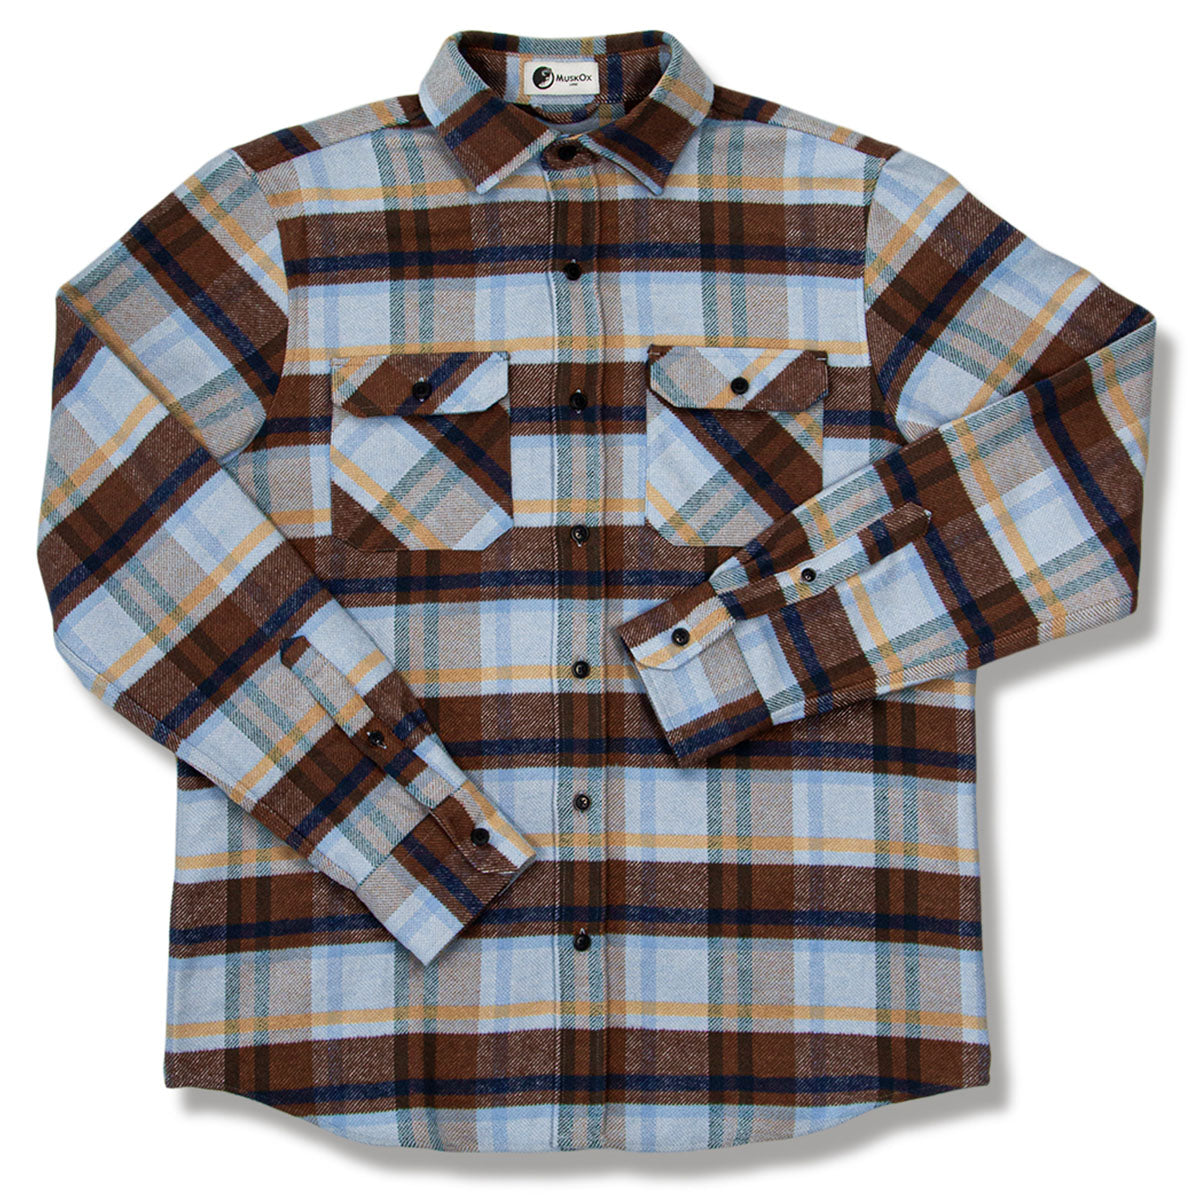 Muskox Flannels Three Seasons Flannel, Soft and Durable Flannel Shirt for Men XXXL / Pine